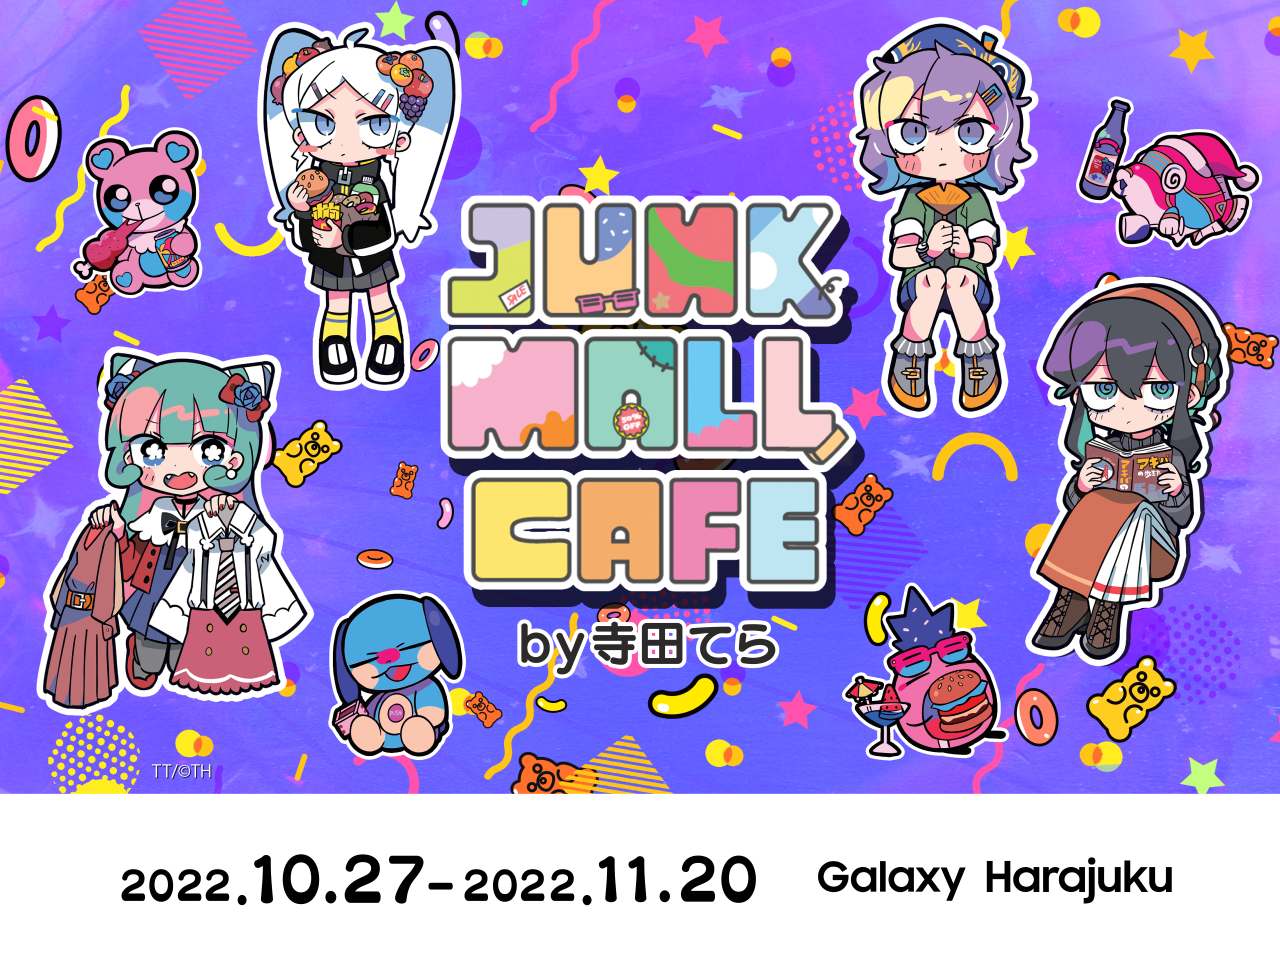 JUNK MALL CAFE by寺田てらの開催が決定！